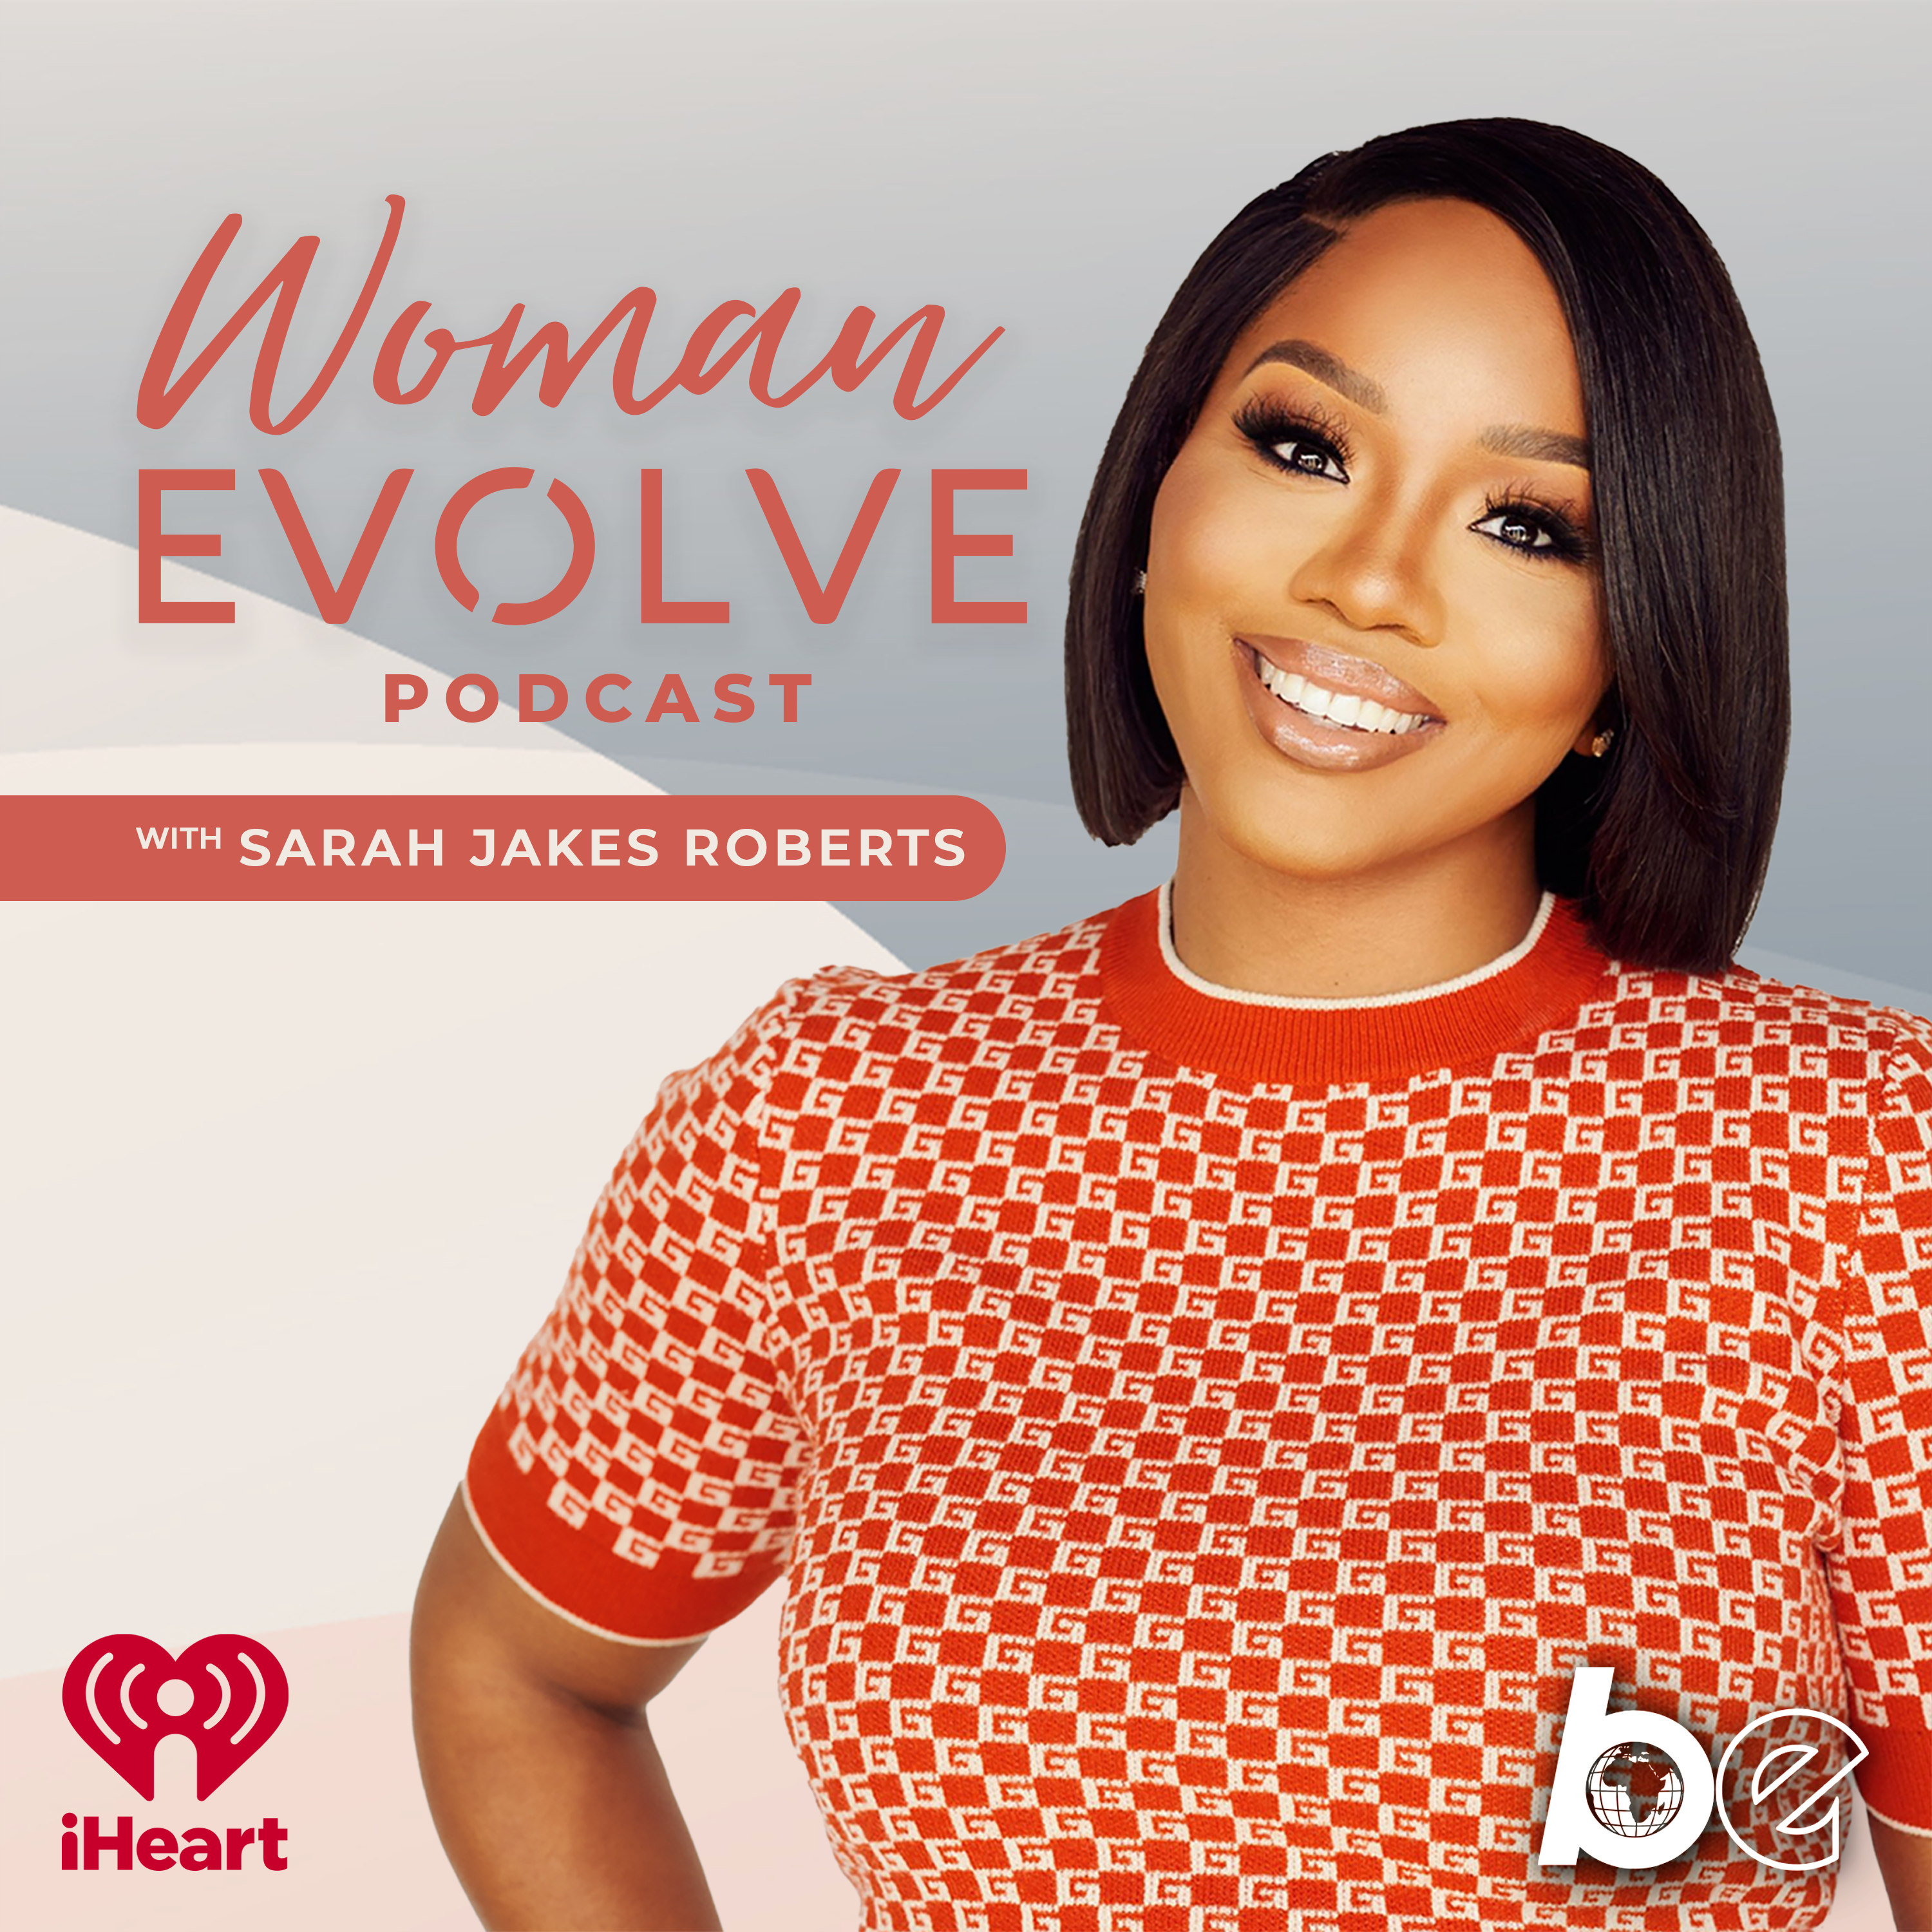 Woman Evolve is Now Part of the Black Effect Podcast Network